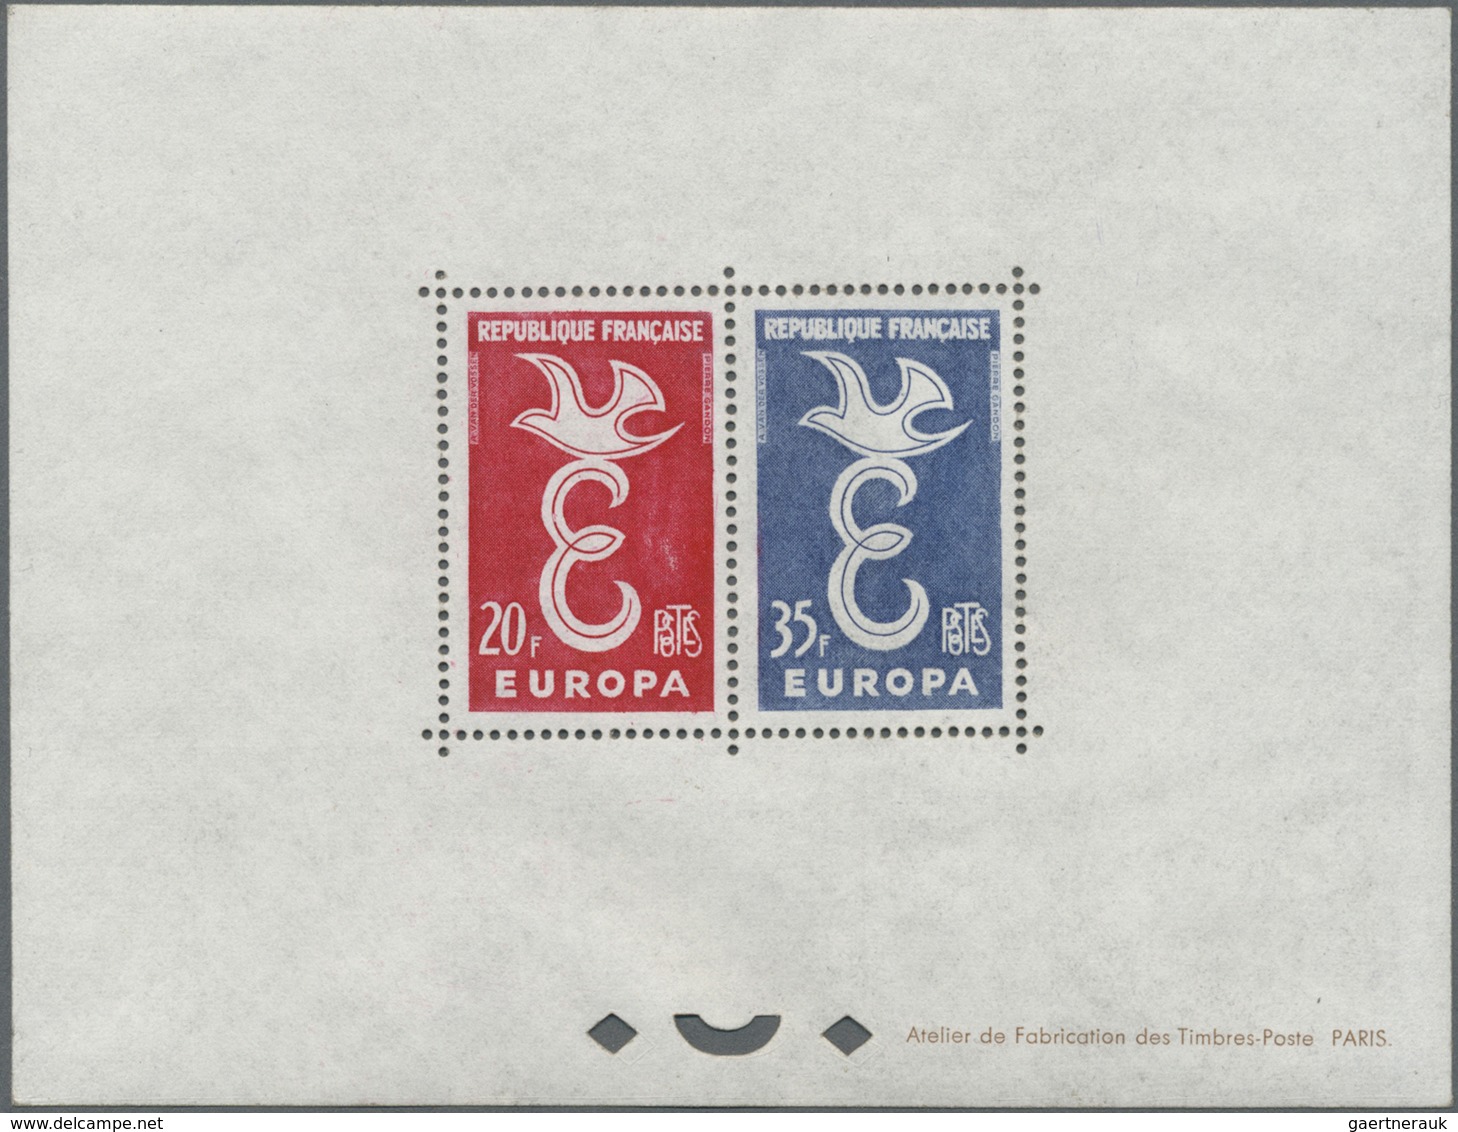 ** Thematik: Europa / Europe: 1958, France. EUROPA Issue (2 Values) As A Collective DeLuxe Sheet. Mint, - European Ideas